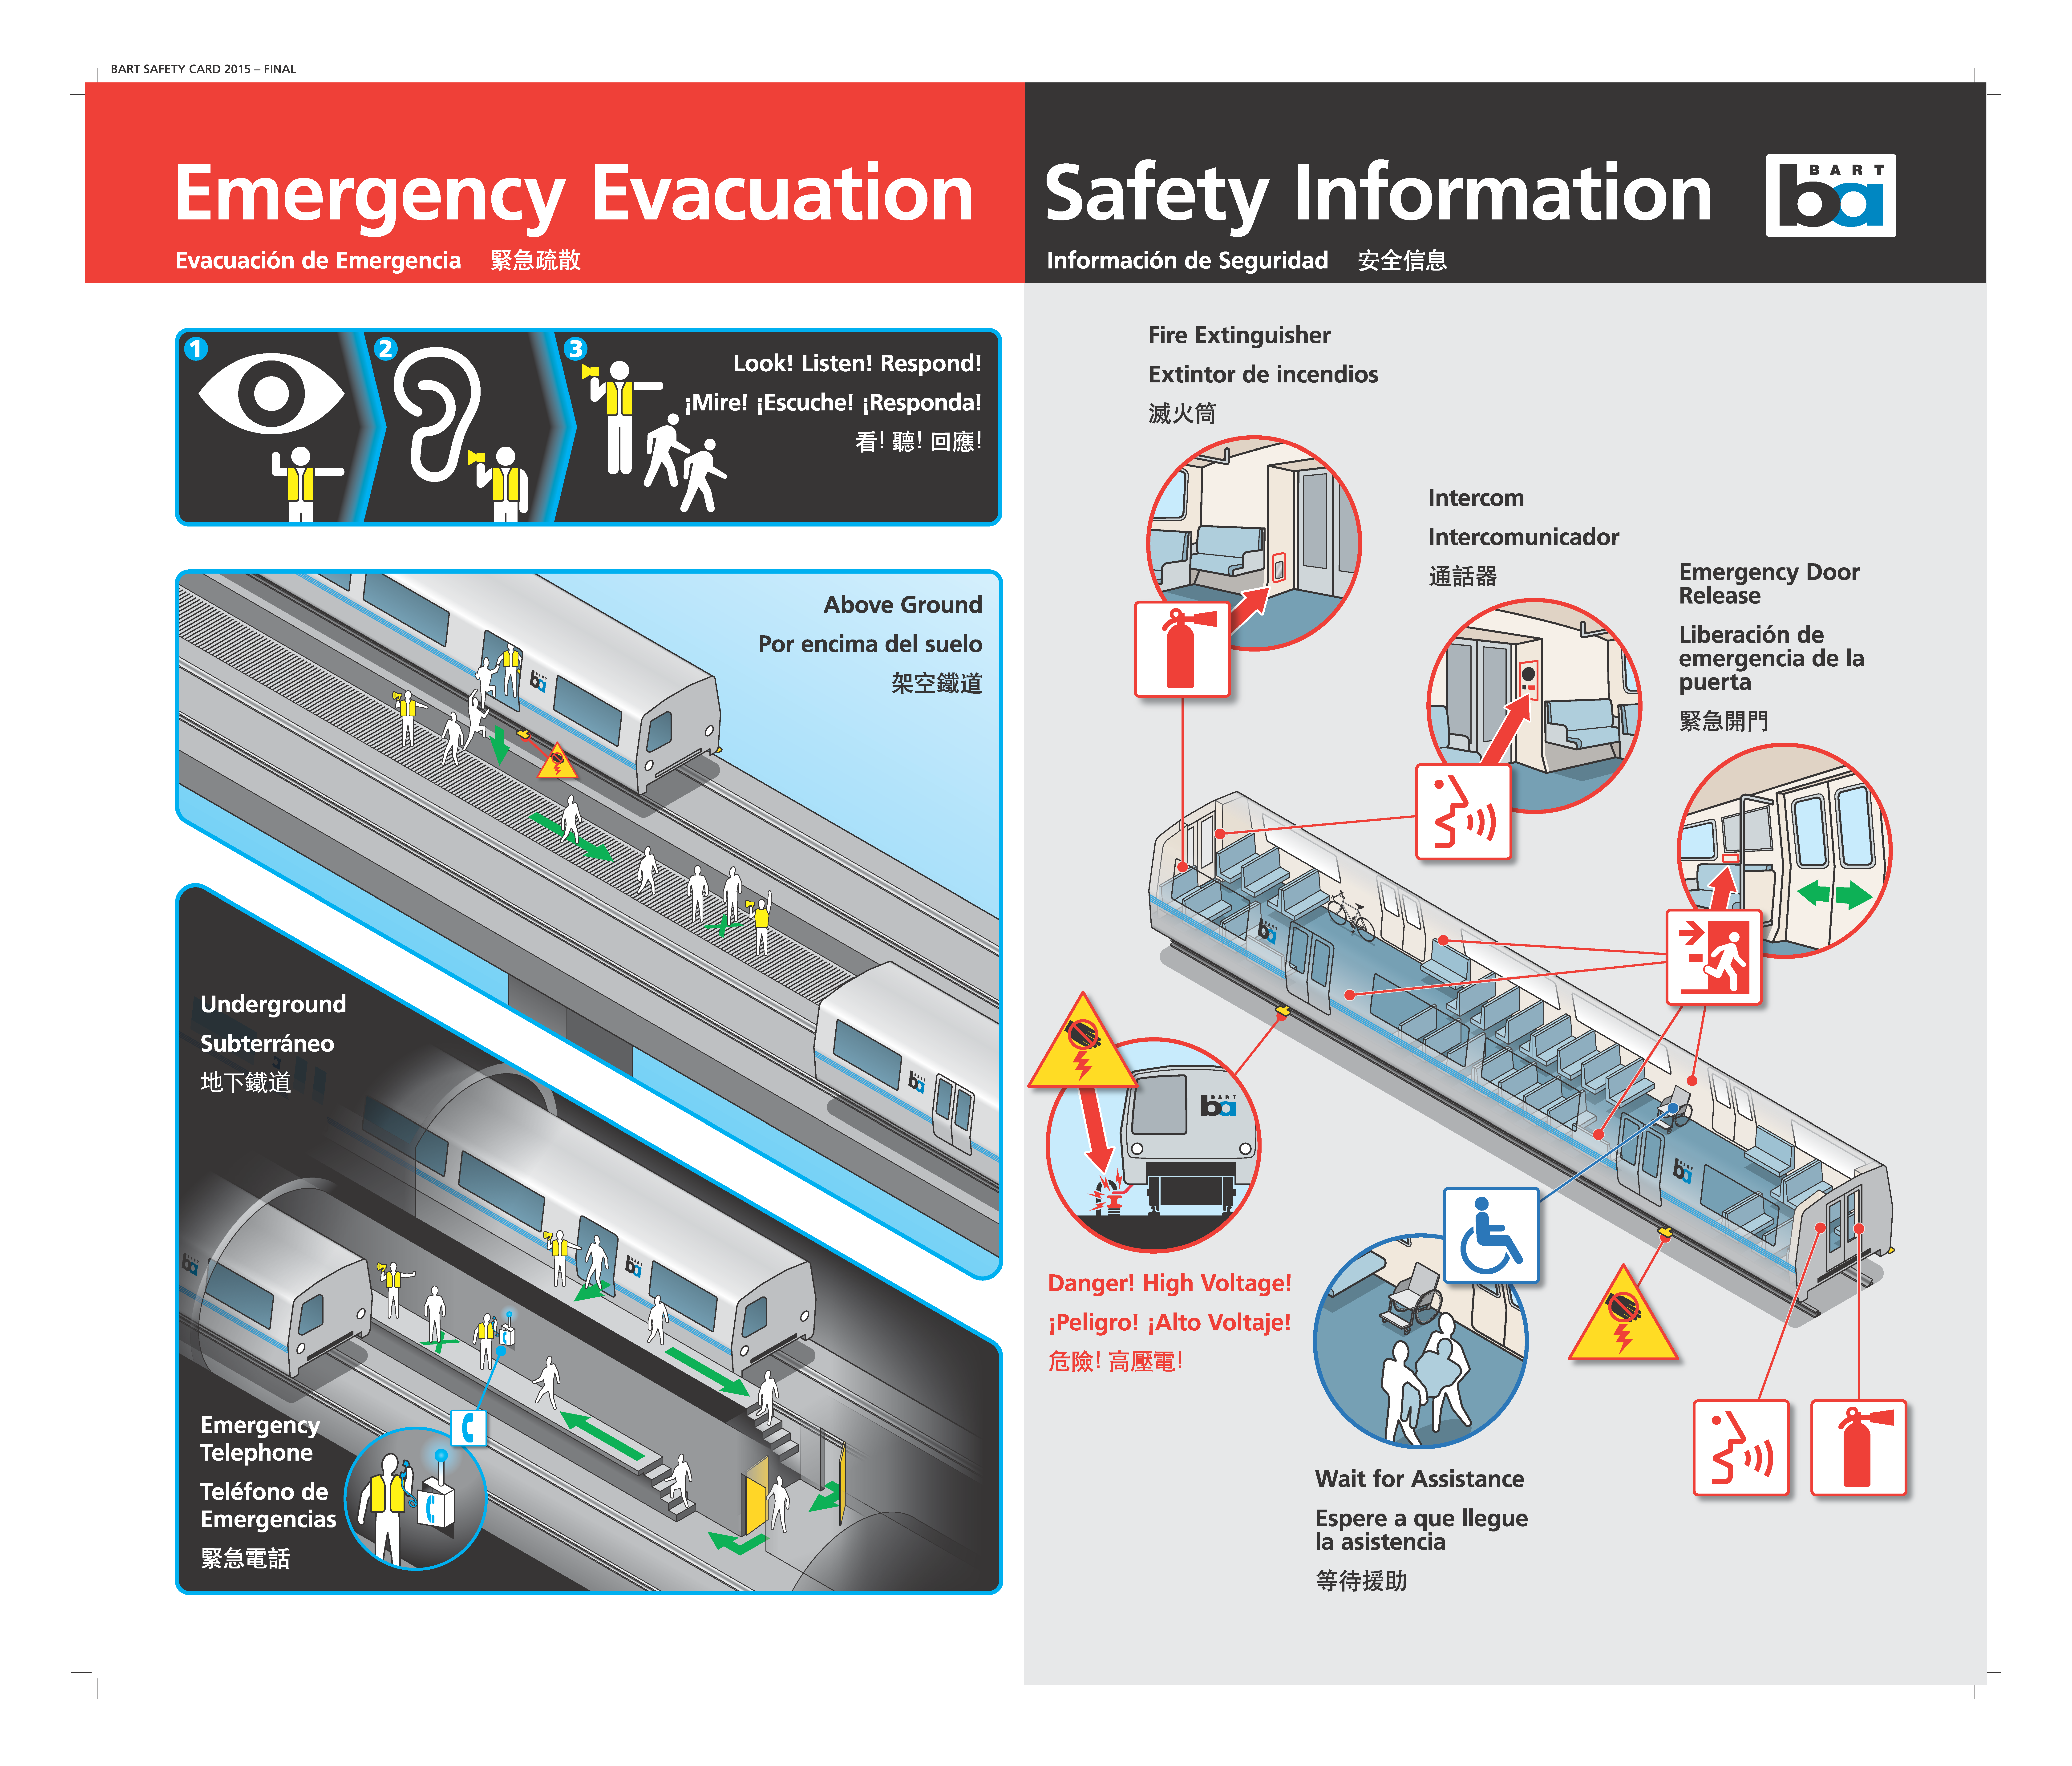 New version of emergency poster has more pictograms bart.gov